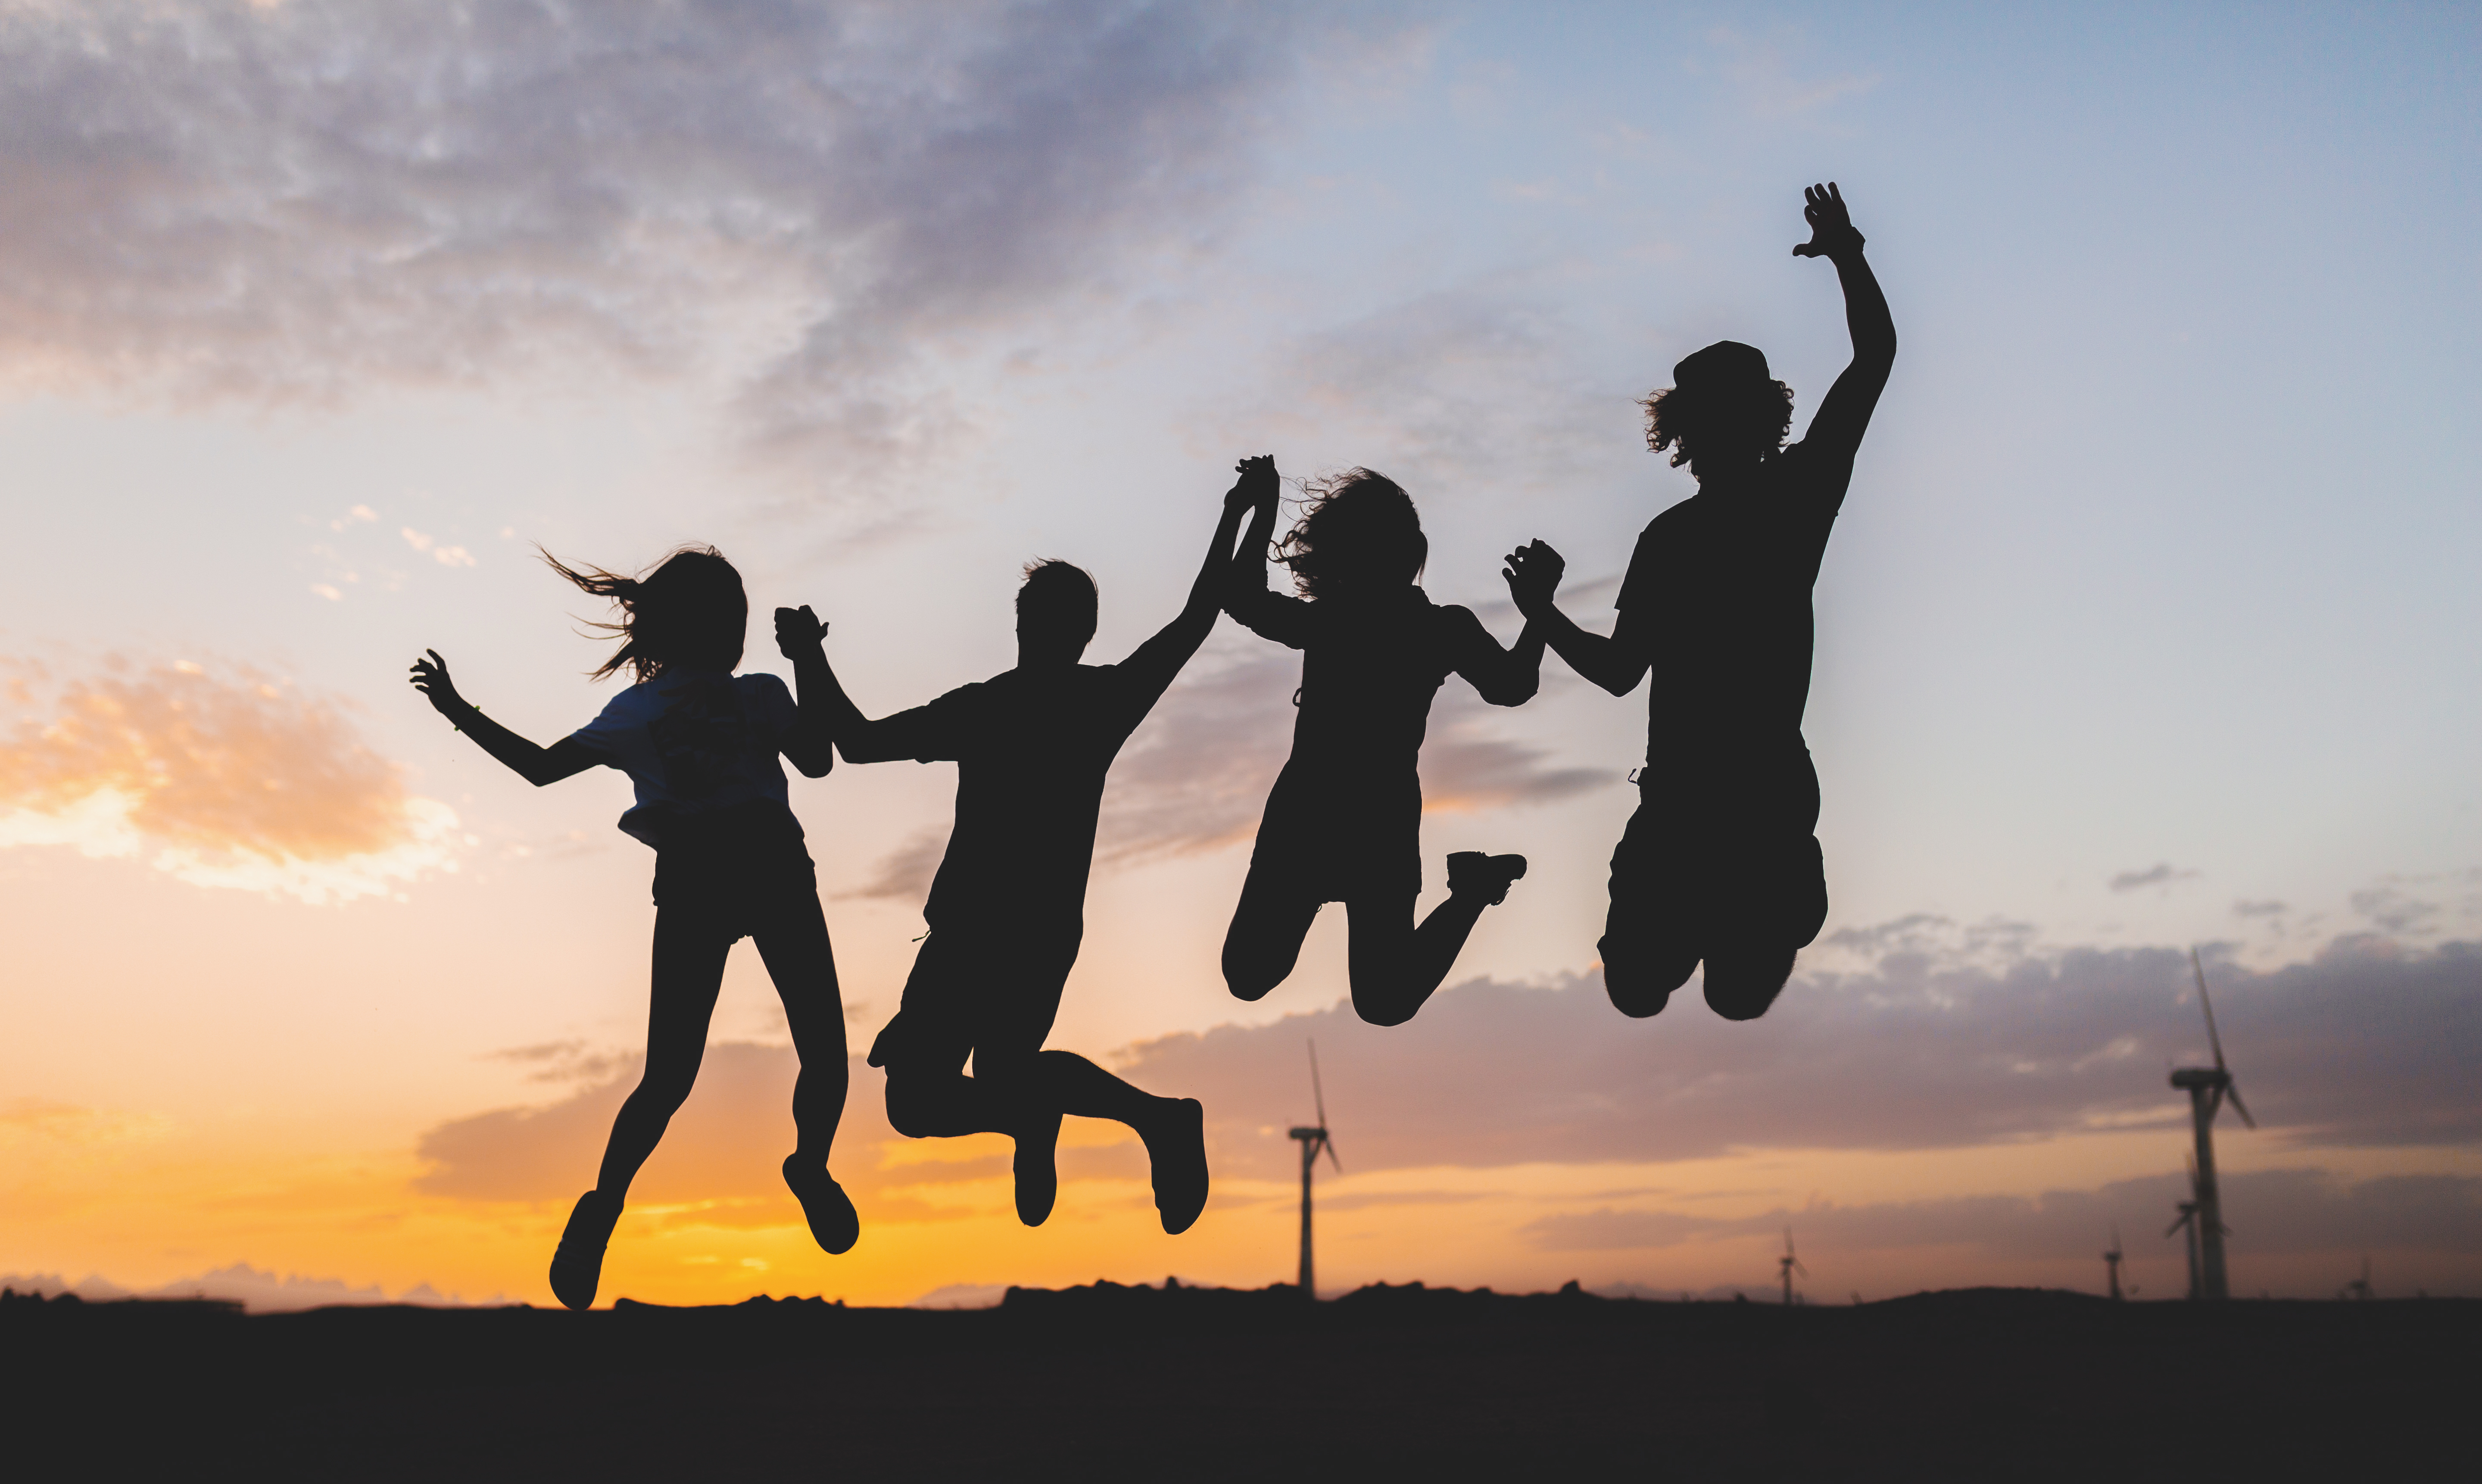 r6767_9_happy-friends-silhouettes-jumping-sunset.jpg